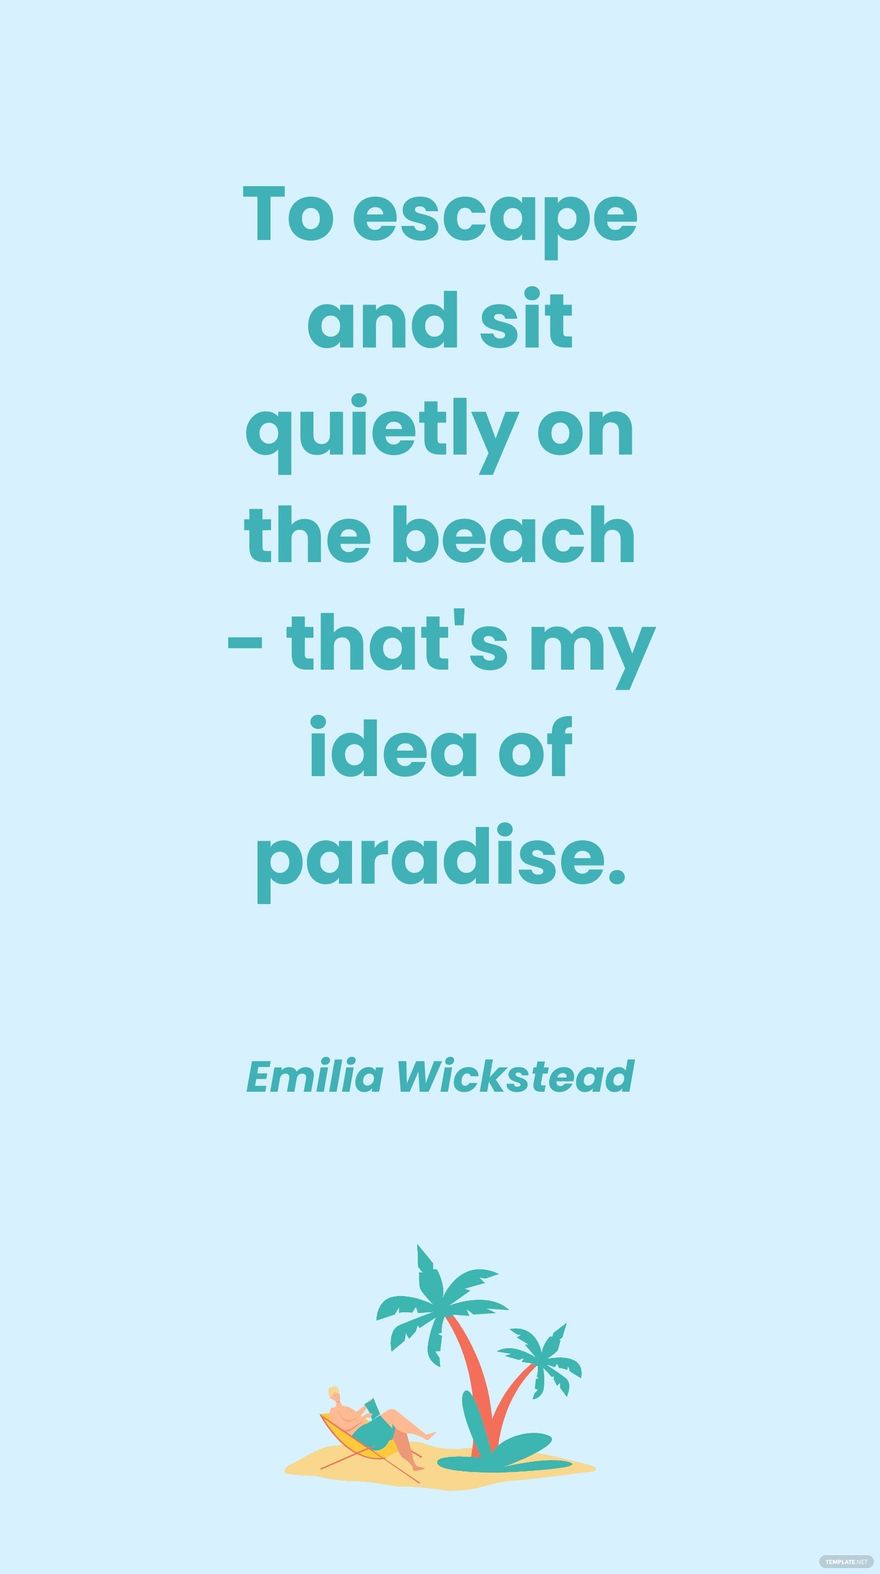 Free Emilia Wickstead - To escape and sit quietly on the beach - that's my idea of paradise. in JPG